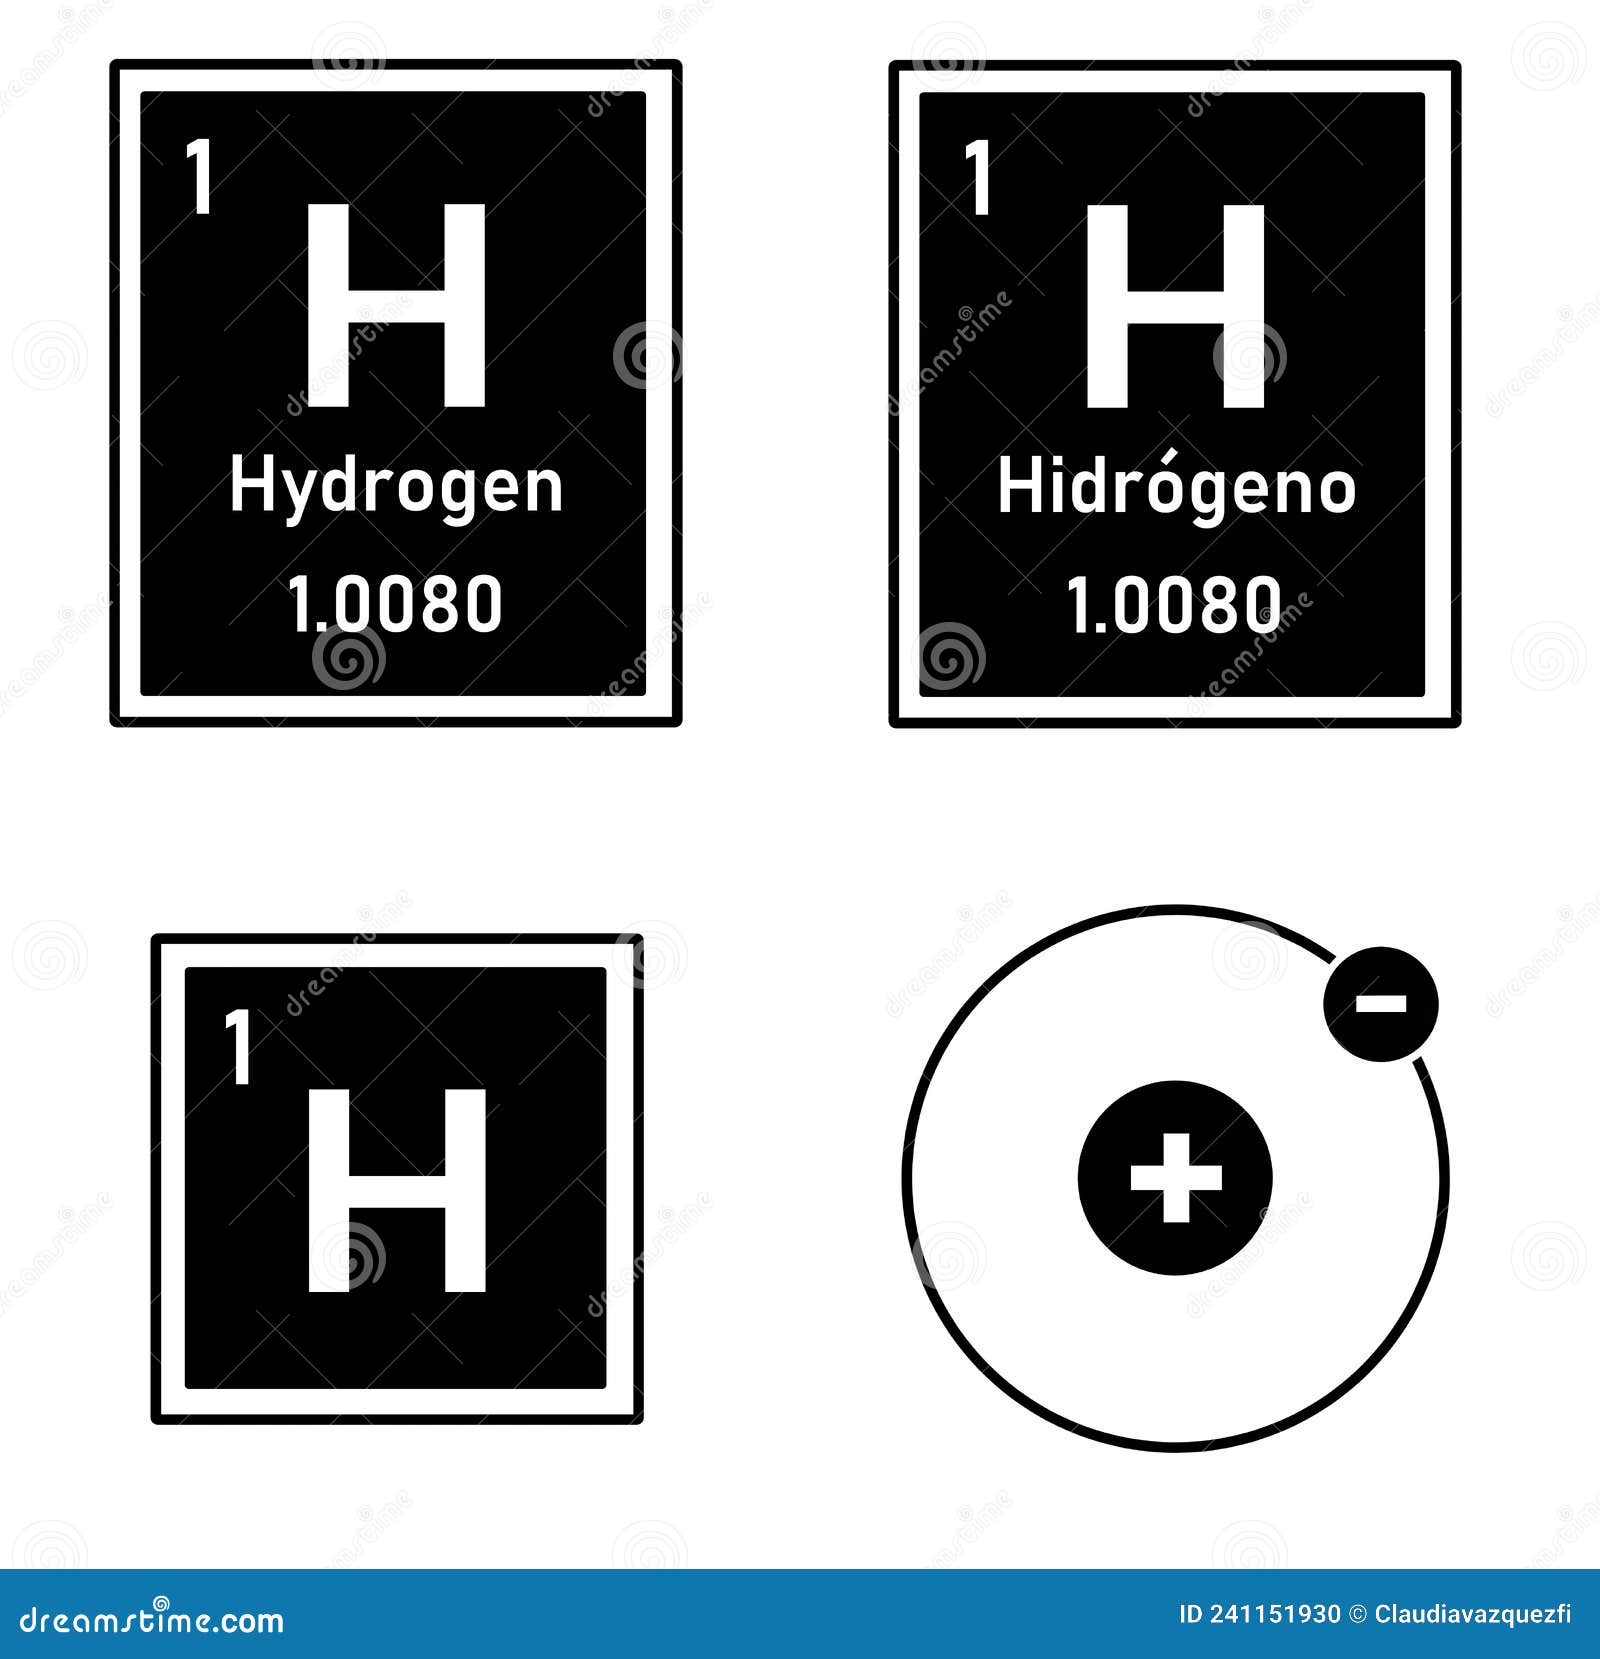  hydrogen from the periodic table with atom